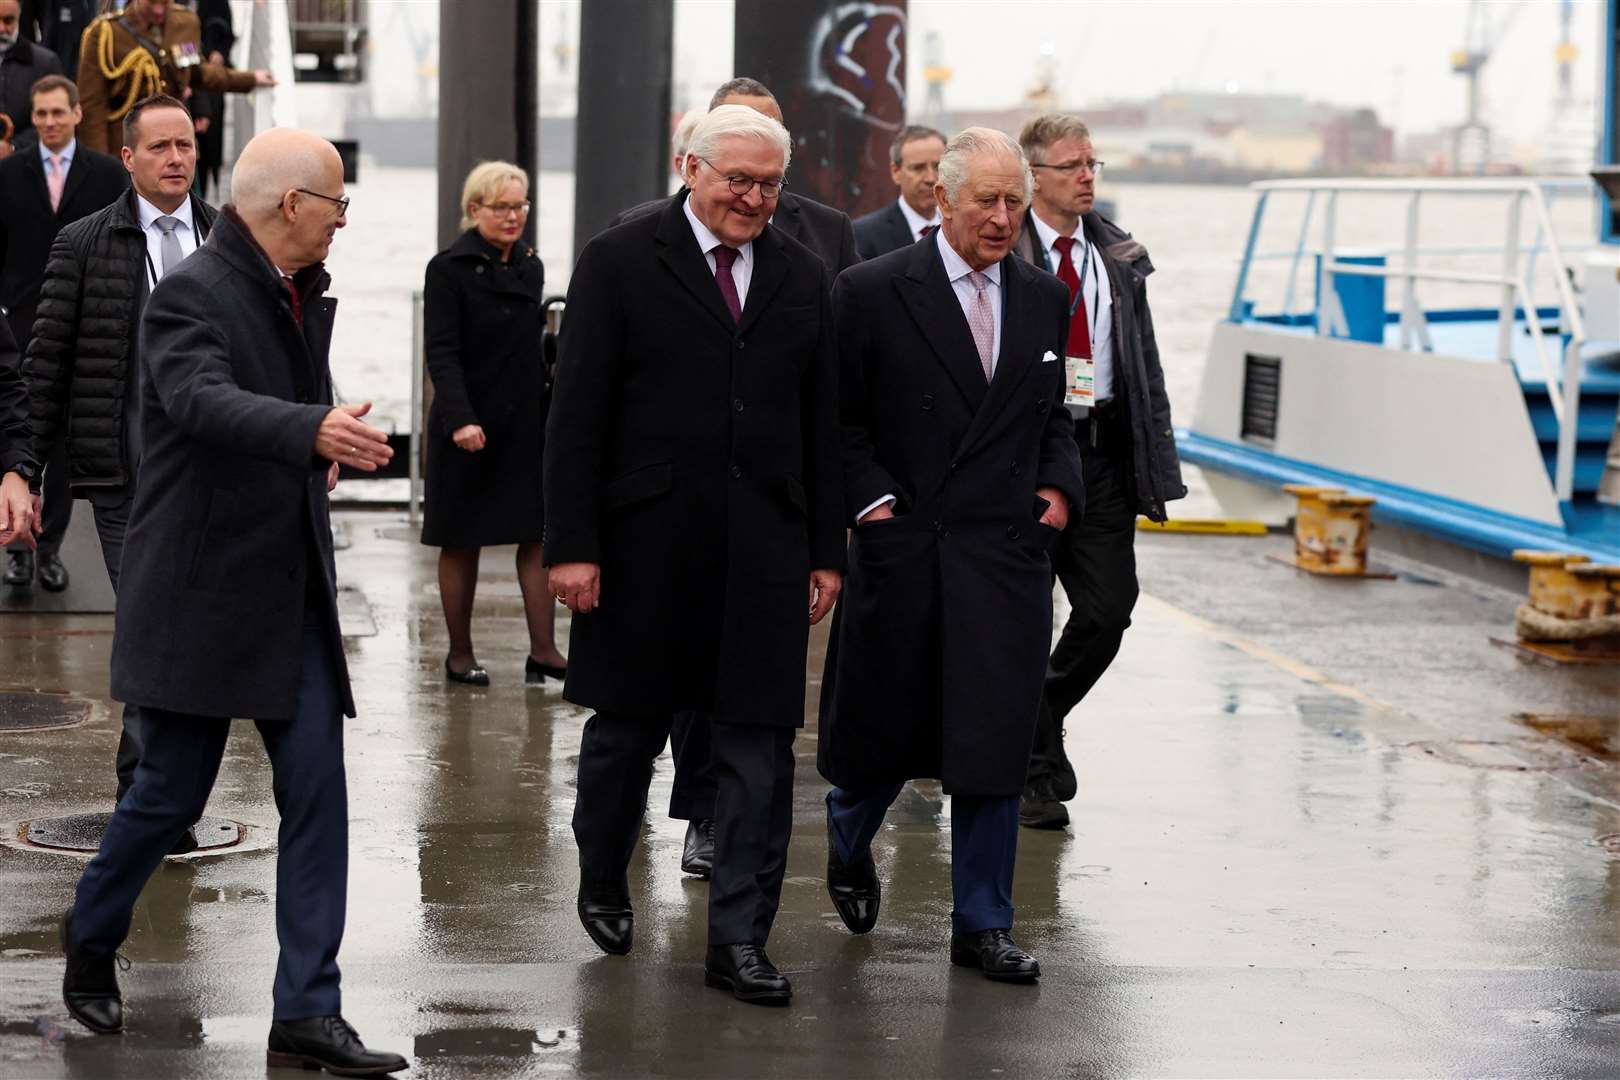 Charles and German President Frank-Walter Steinmeier during a visit to Hamburg (Phil Noble/PA)